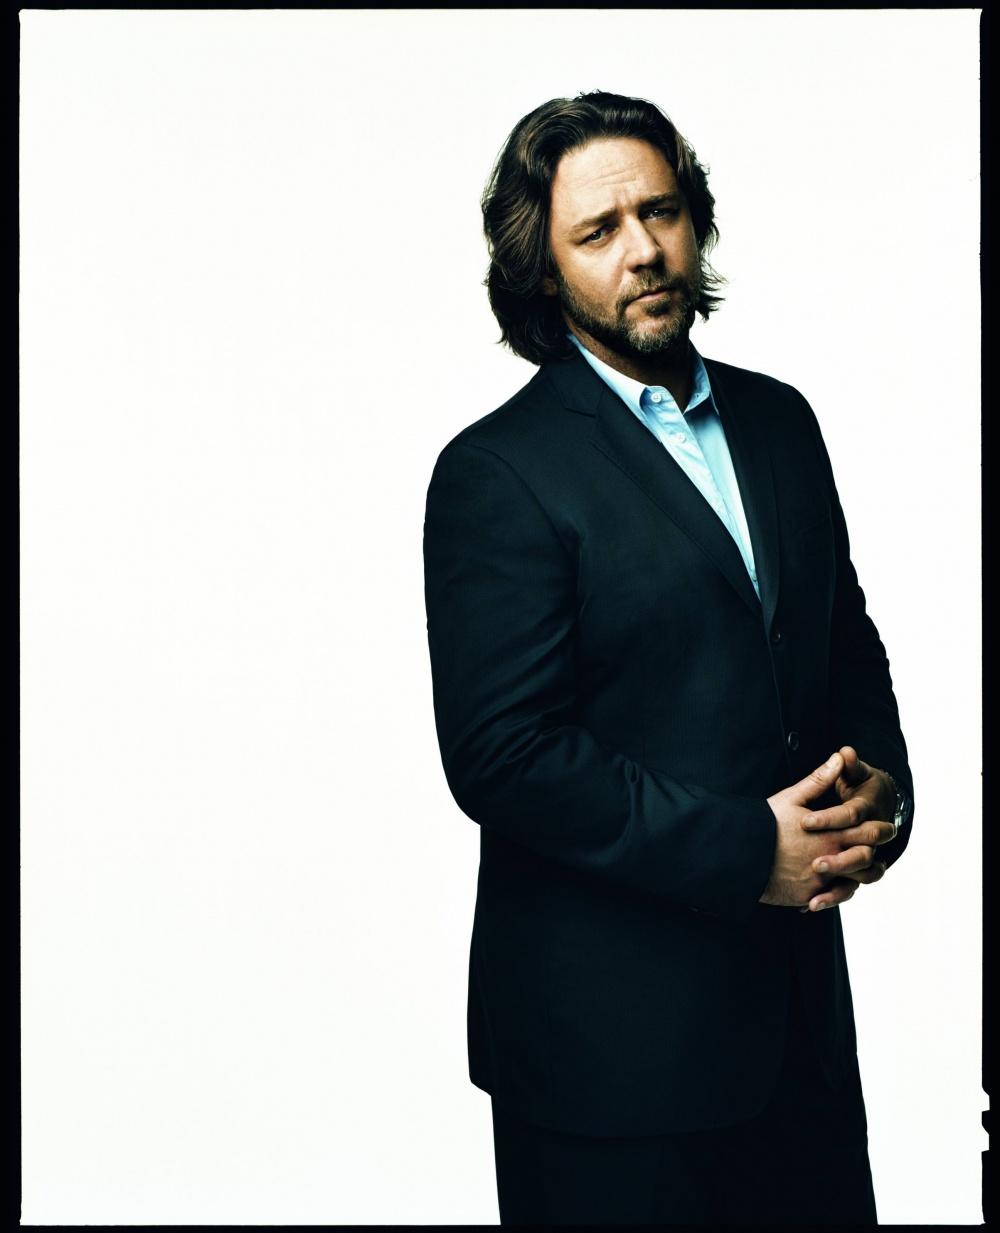 Photo №3962 Russell Crowe.